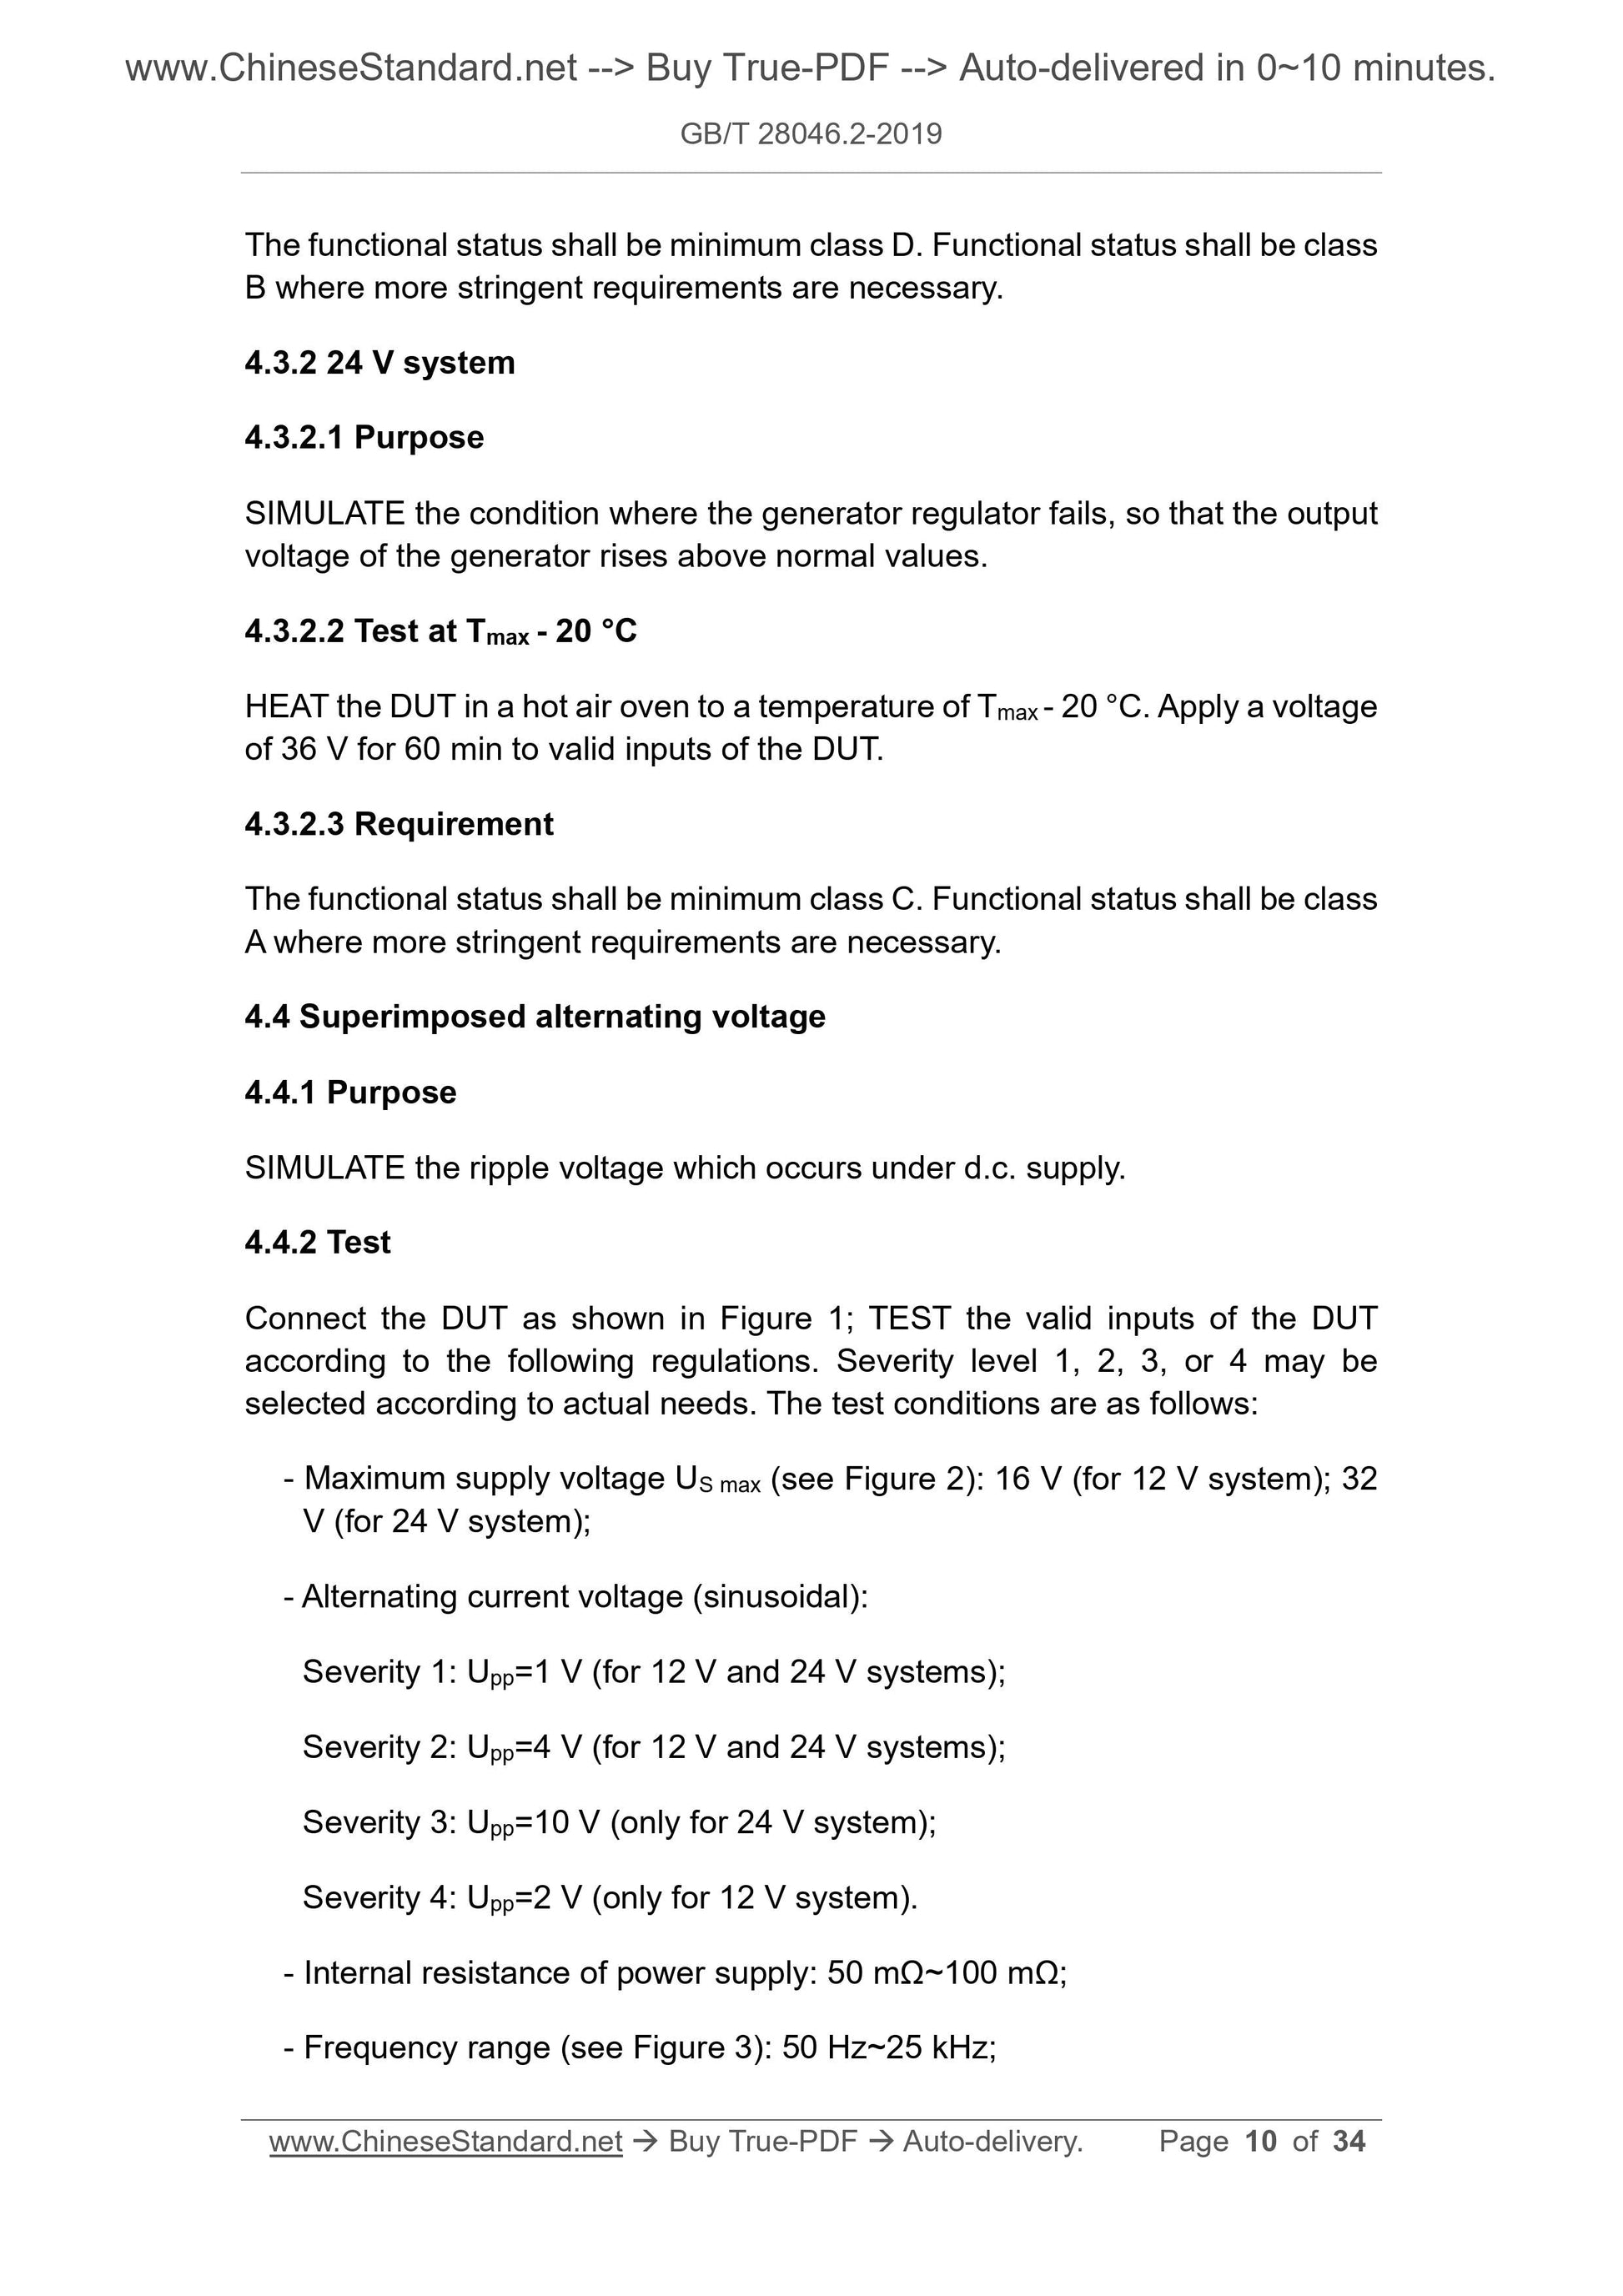 GB/T 28046.2-2019 Page 4